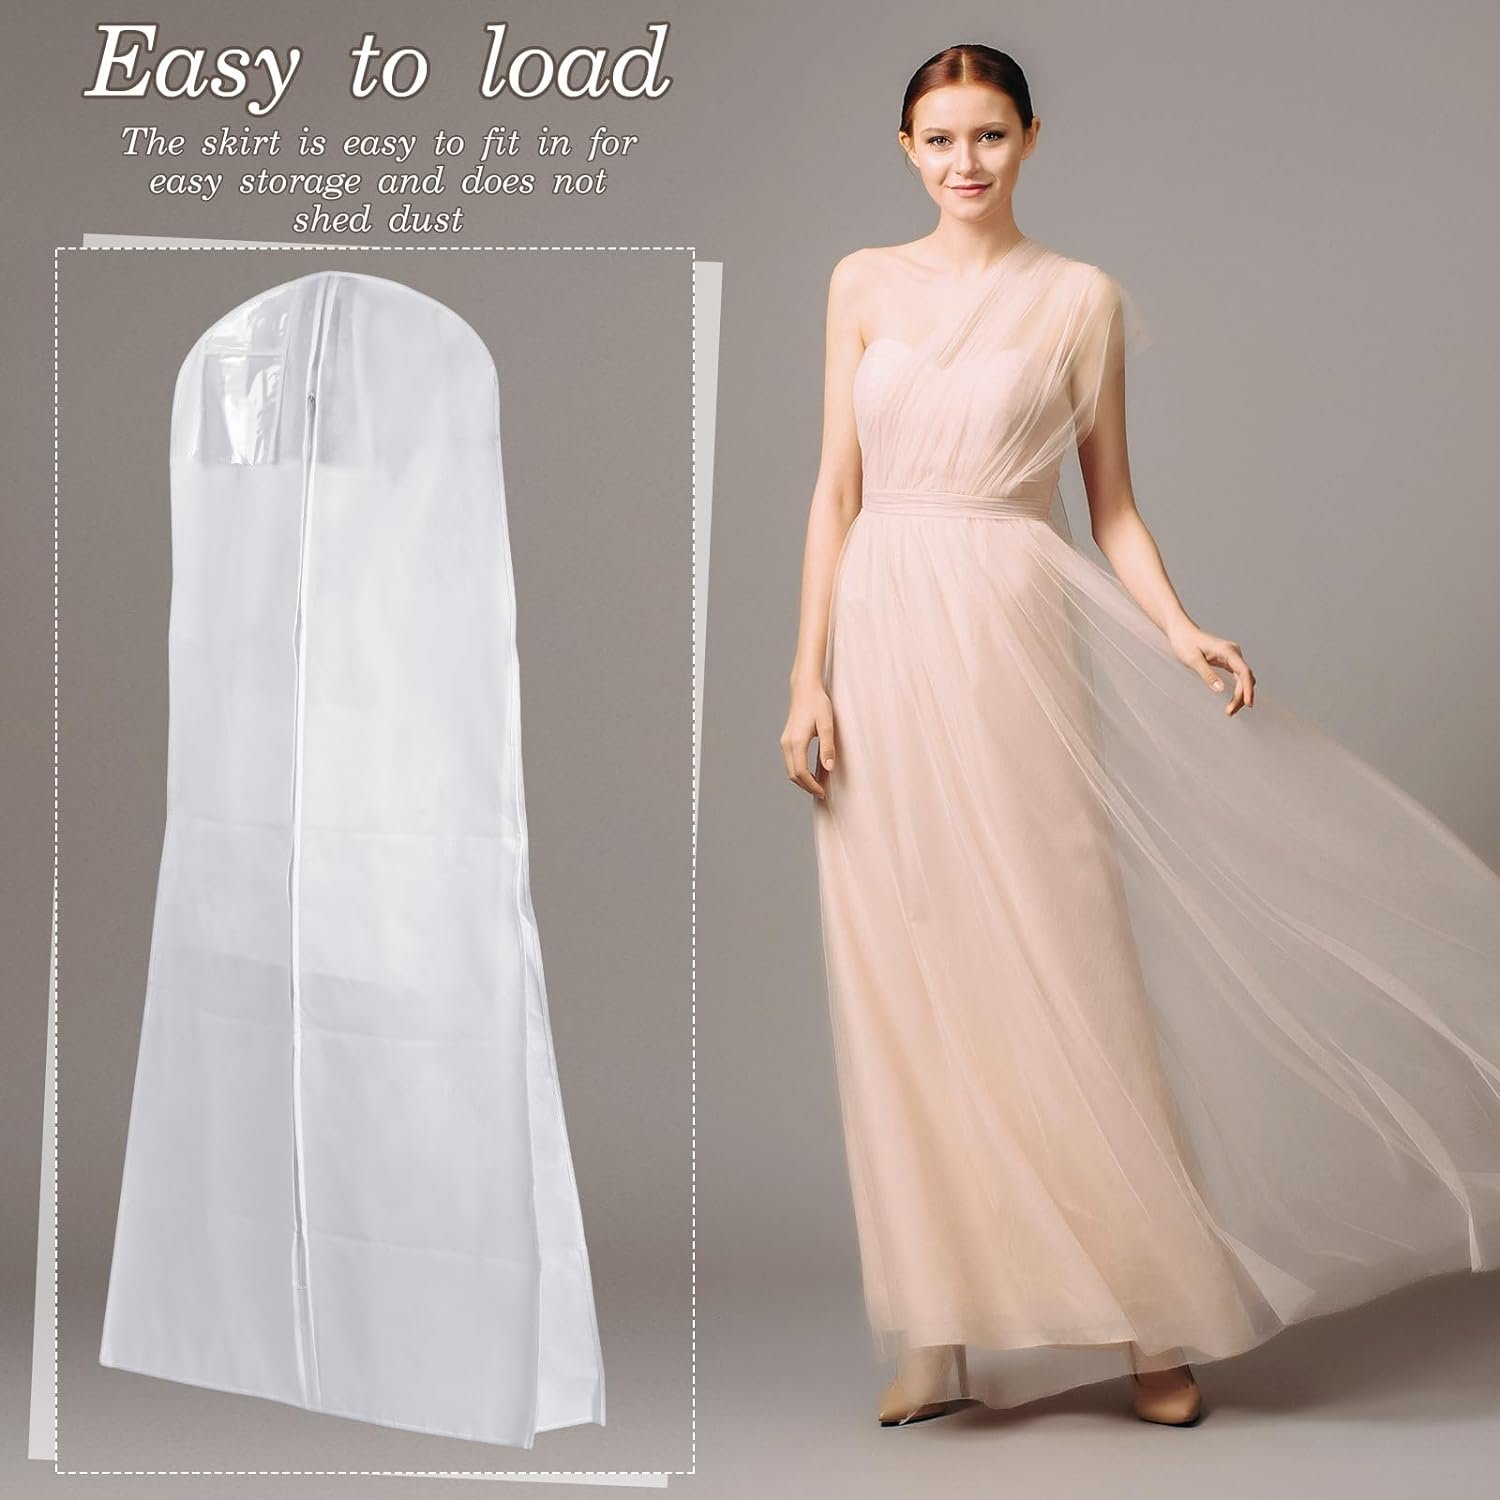 Windyun 4 Pcs White Wedding Dress Garment Bag 63 Inch Long Non Woven Garment Covers Breathable Large Hanging Long Gown Clothes Cover for Bridal Travel Organization : Home  Kitchen